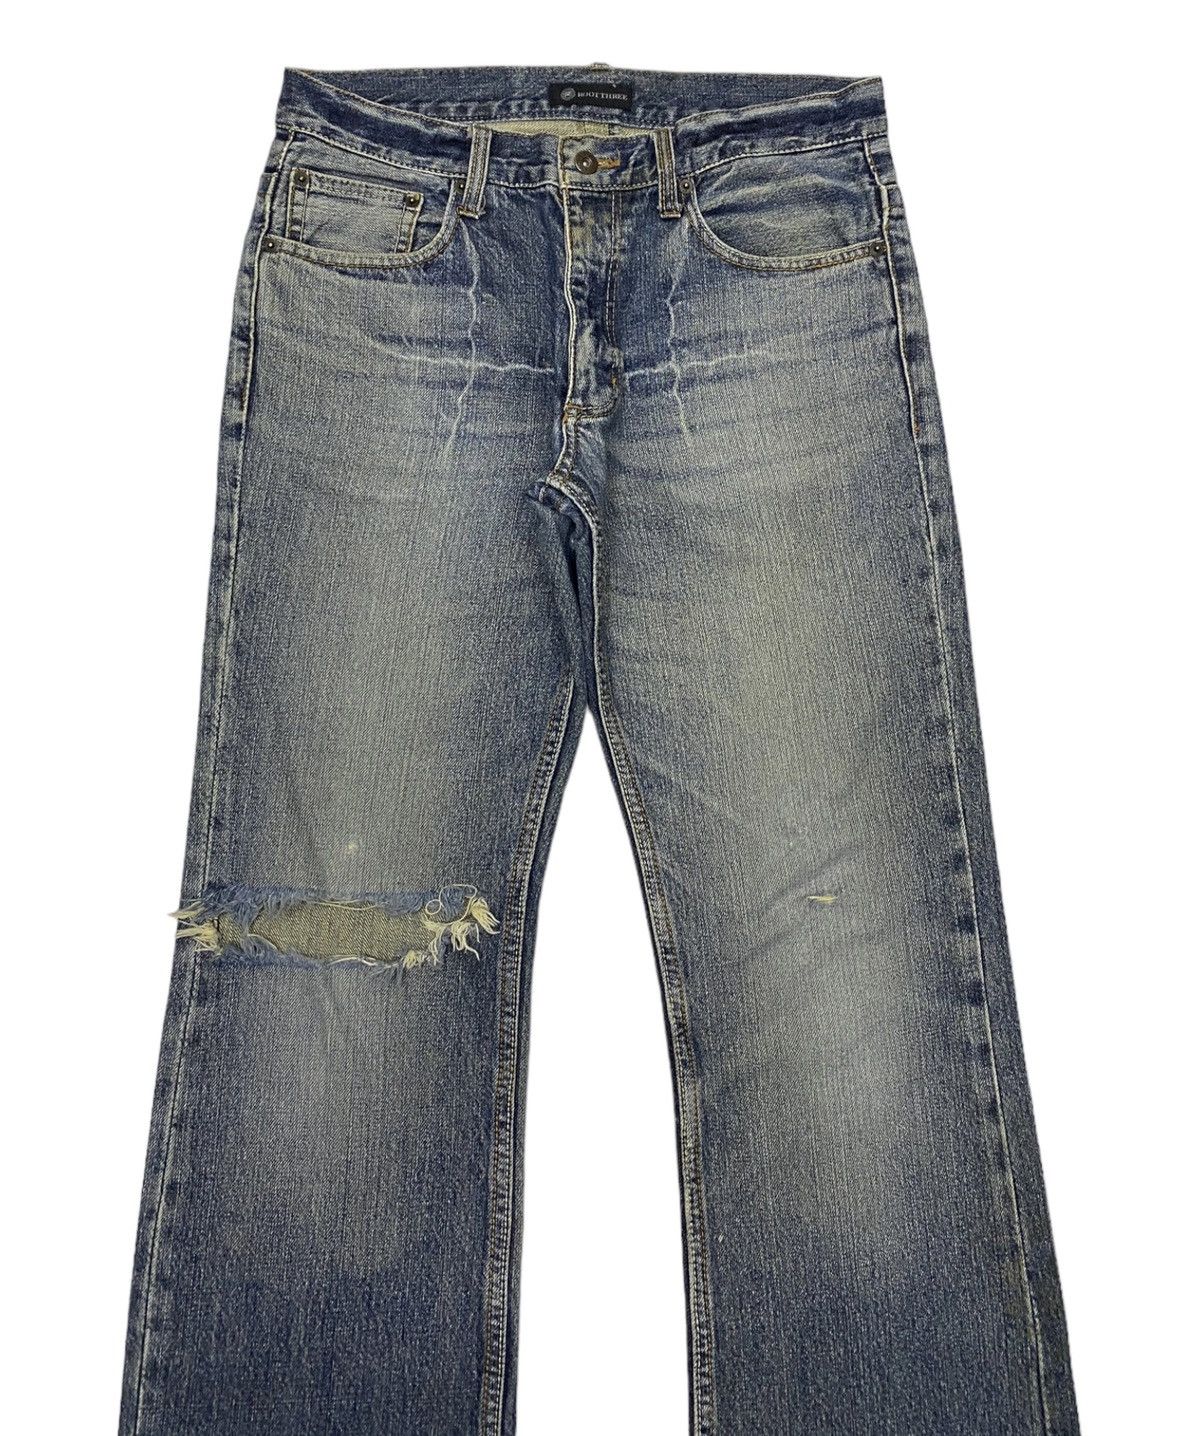 Archival Clothing - FLARED🔥ROOT THREE DISTRESSED DENIM JEANS - 5